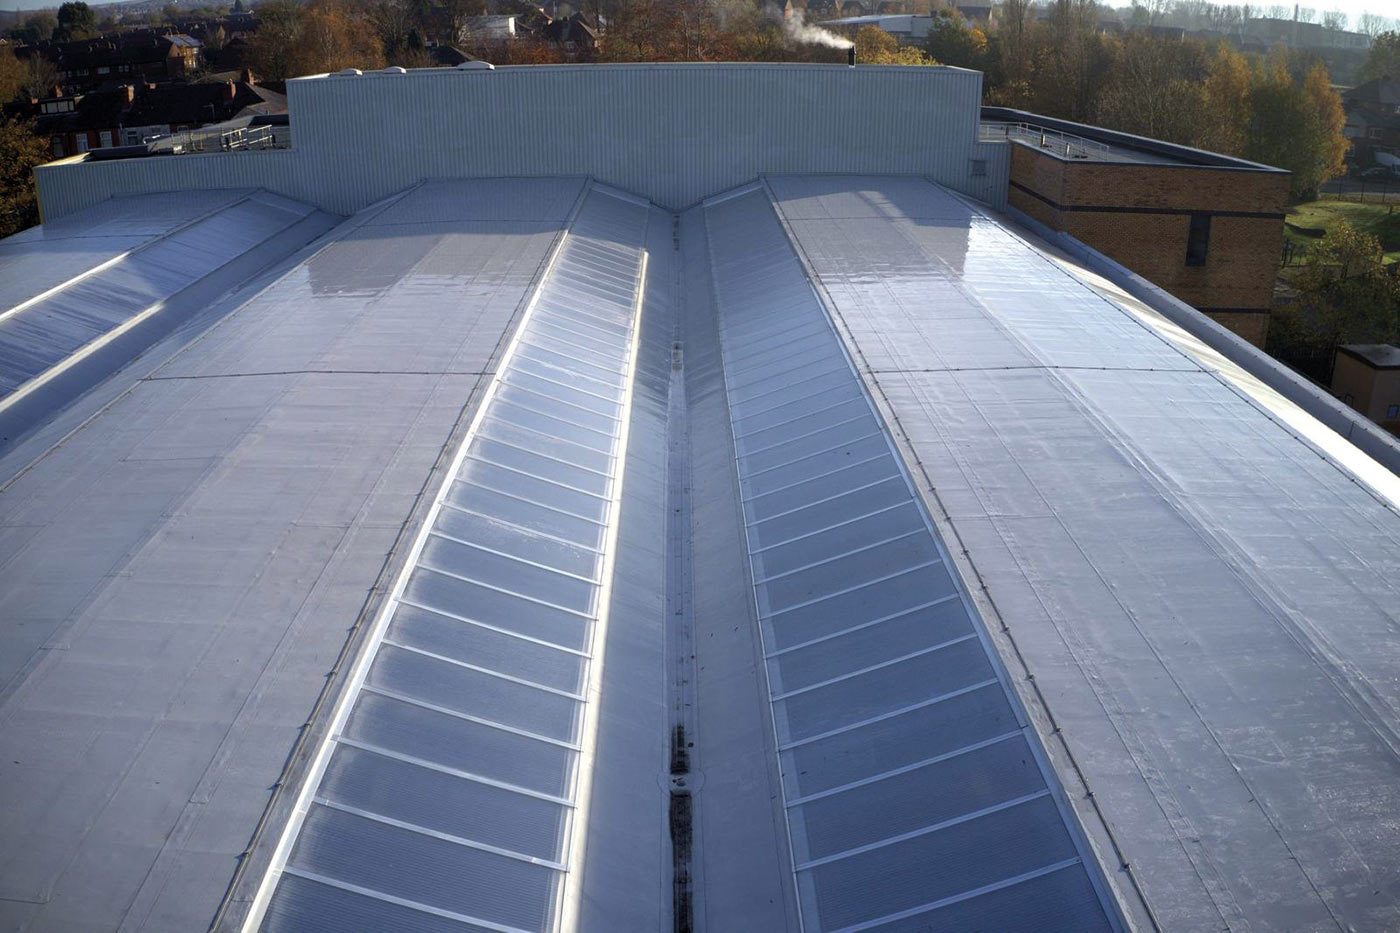 TaperedPlus-Flat-Roof-with-Rooflights